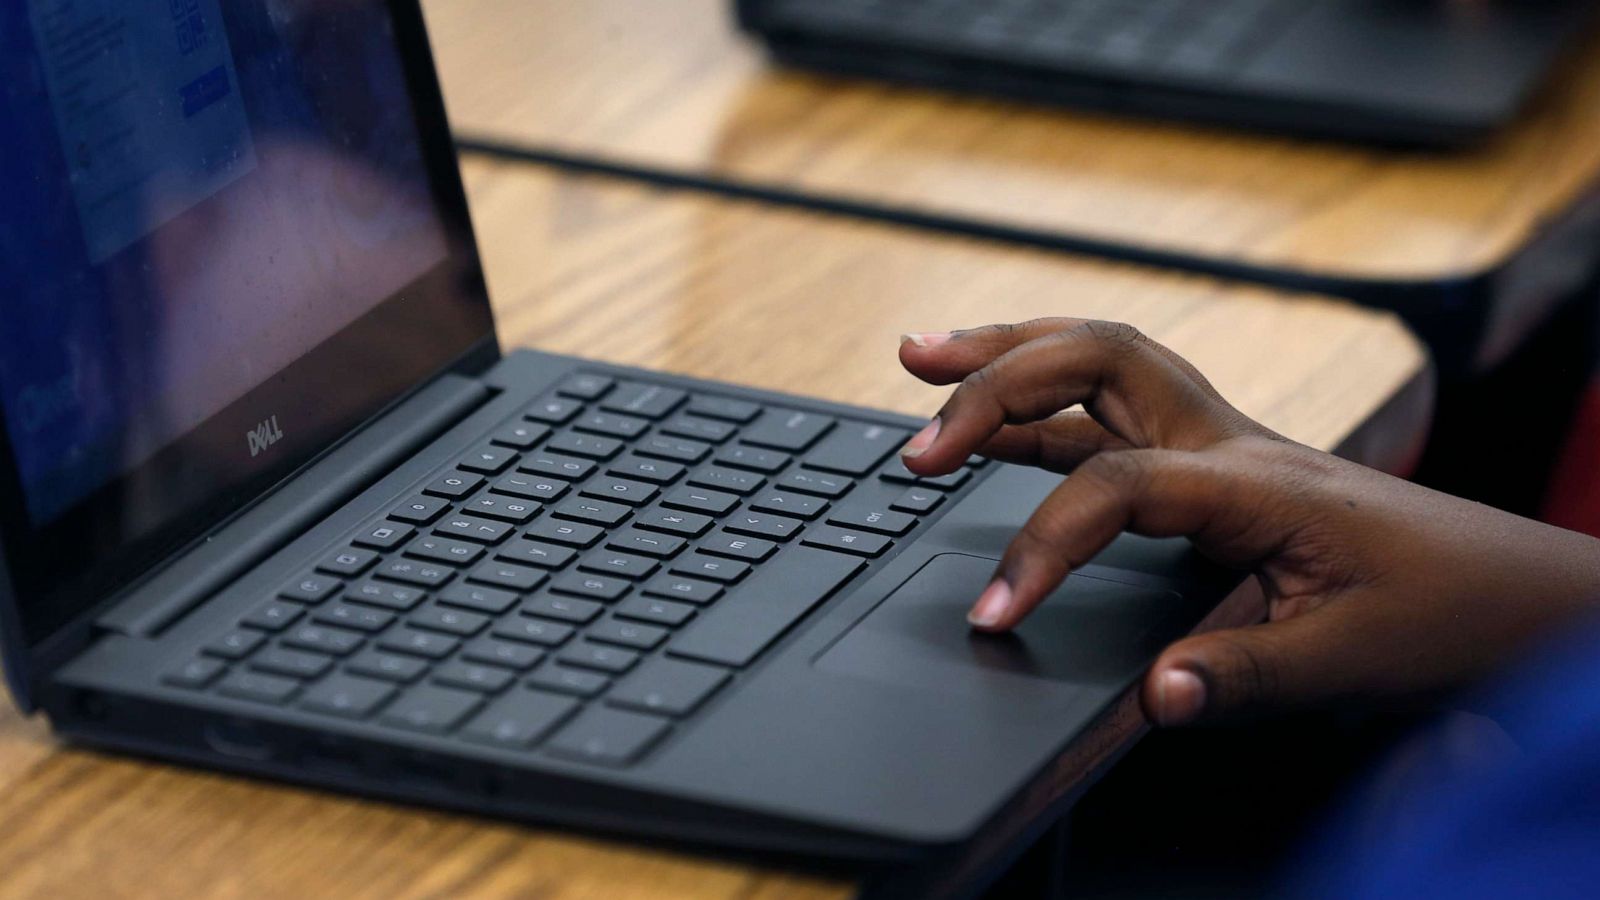 Google's Chromebooks thrive in US classrooms but generate waste